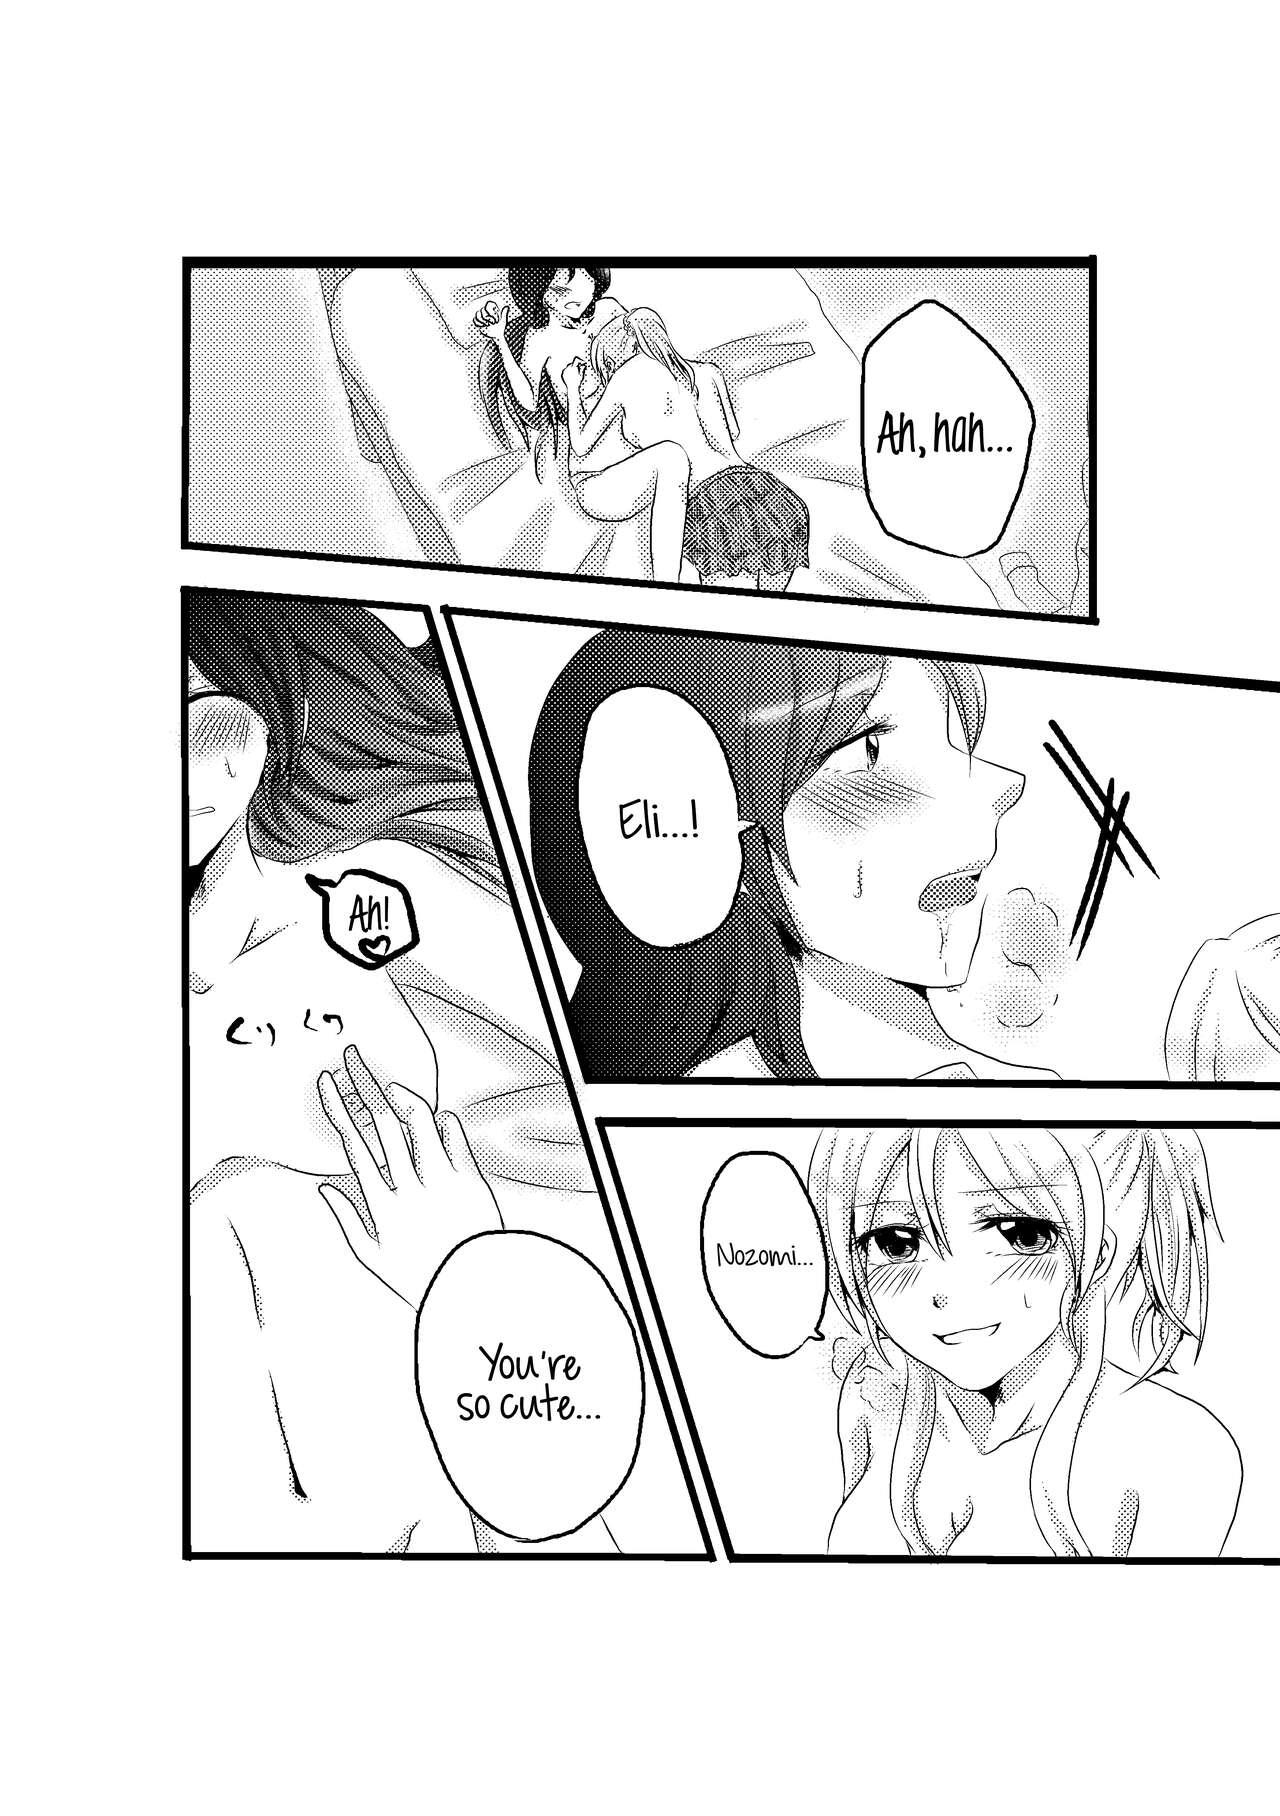 Trimmed [Inugoya (Toshiko)] A story about mischievous Eli-chan and Nozomi-chan (Umi no Shinwa) (Love Live!) [English] [Usr32] [Digital] - Love live Natural - Page 7